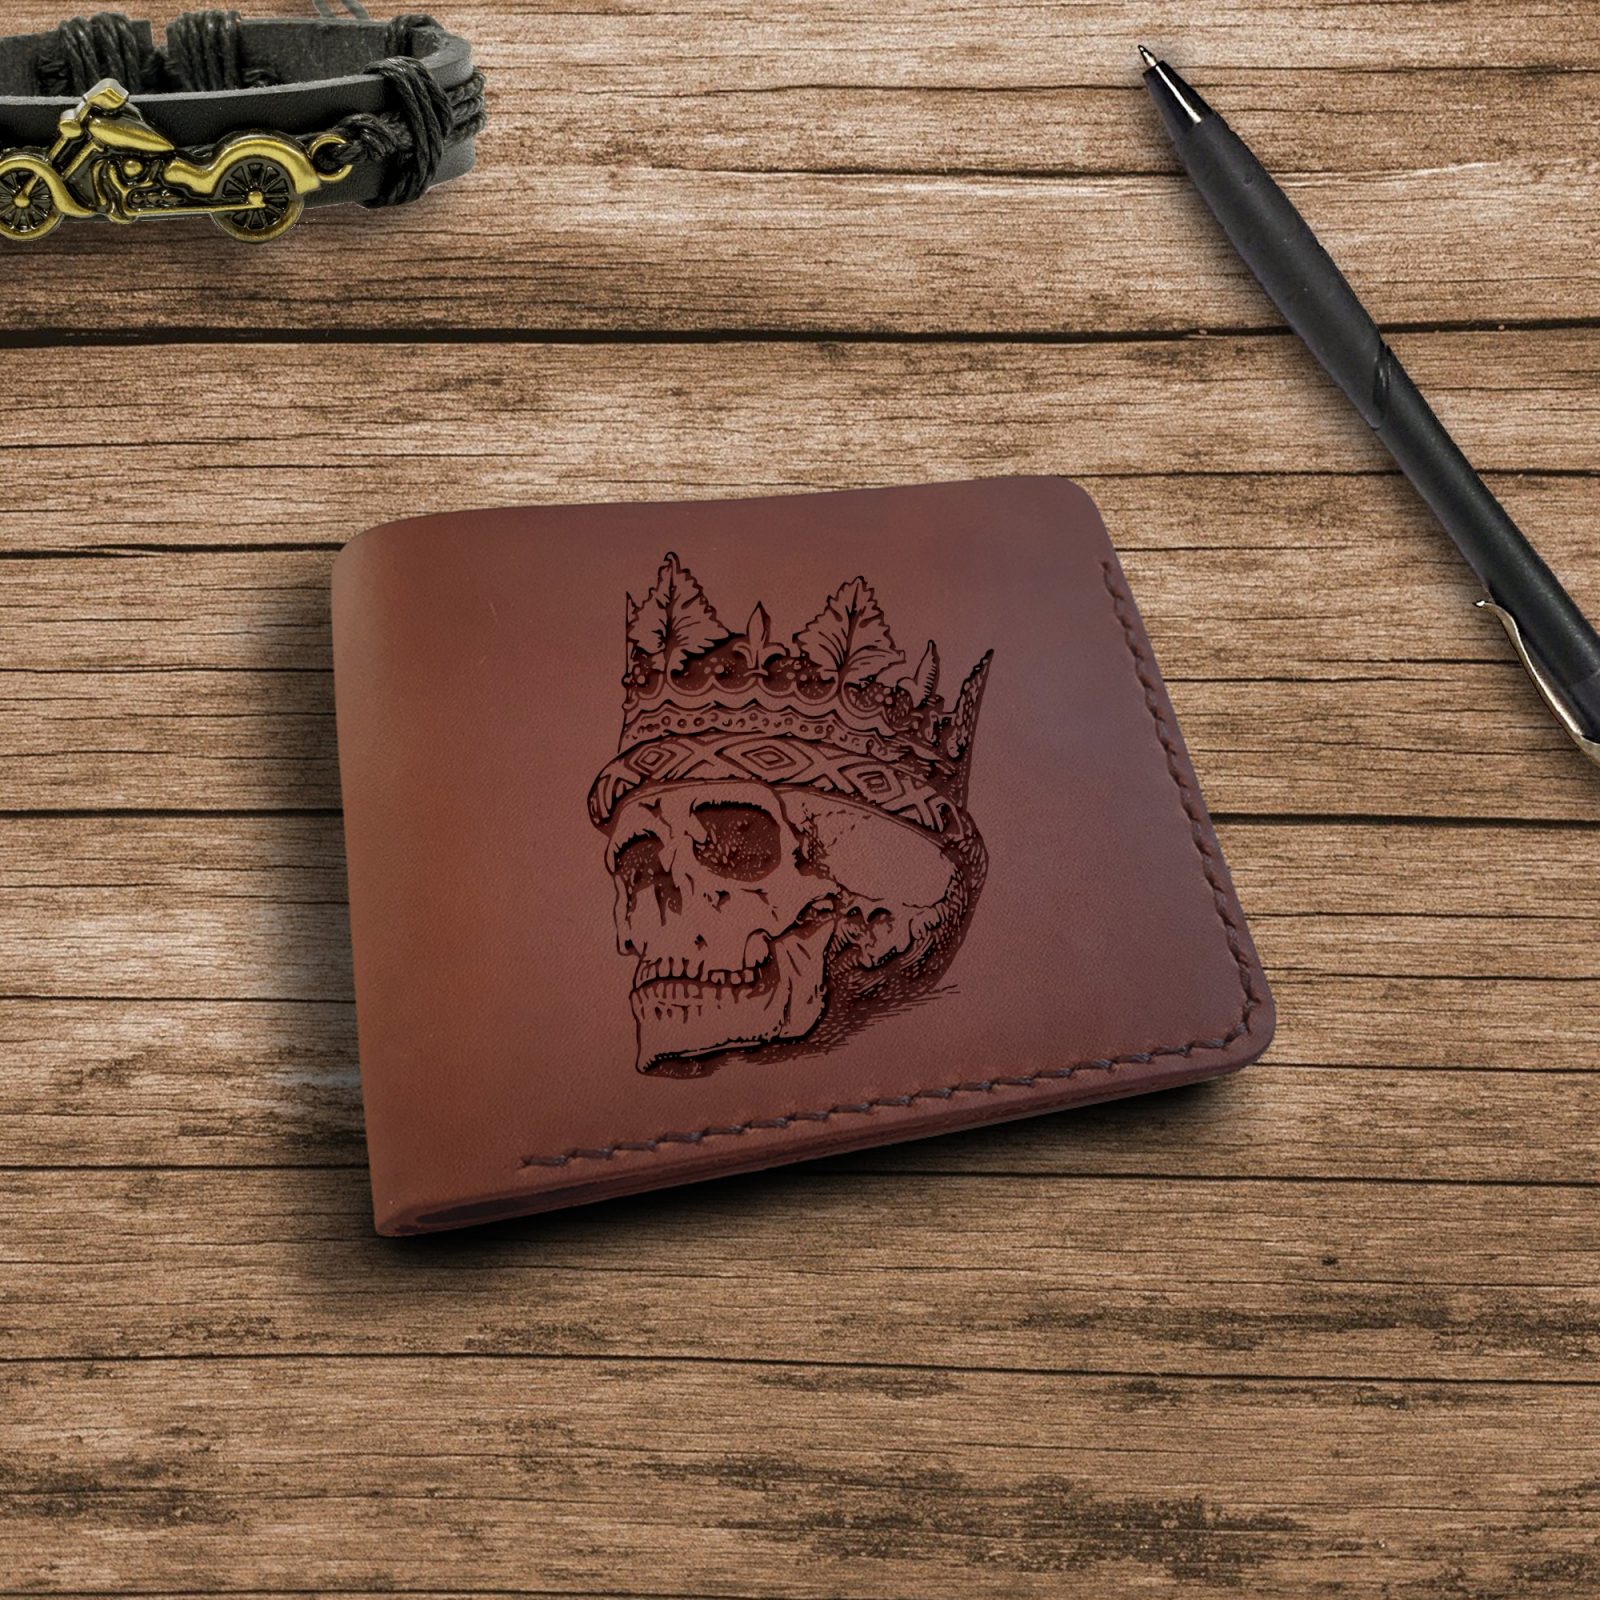  Men's 3D Genuine Leather Wallet, Hand-Carved, Hand-Painted,  Leather Carving, Custom wallet, Personalized wallet, Ragnar Lodbrok,  Viking, Celtic wallet, Crow, Raven : Handmade Products